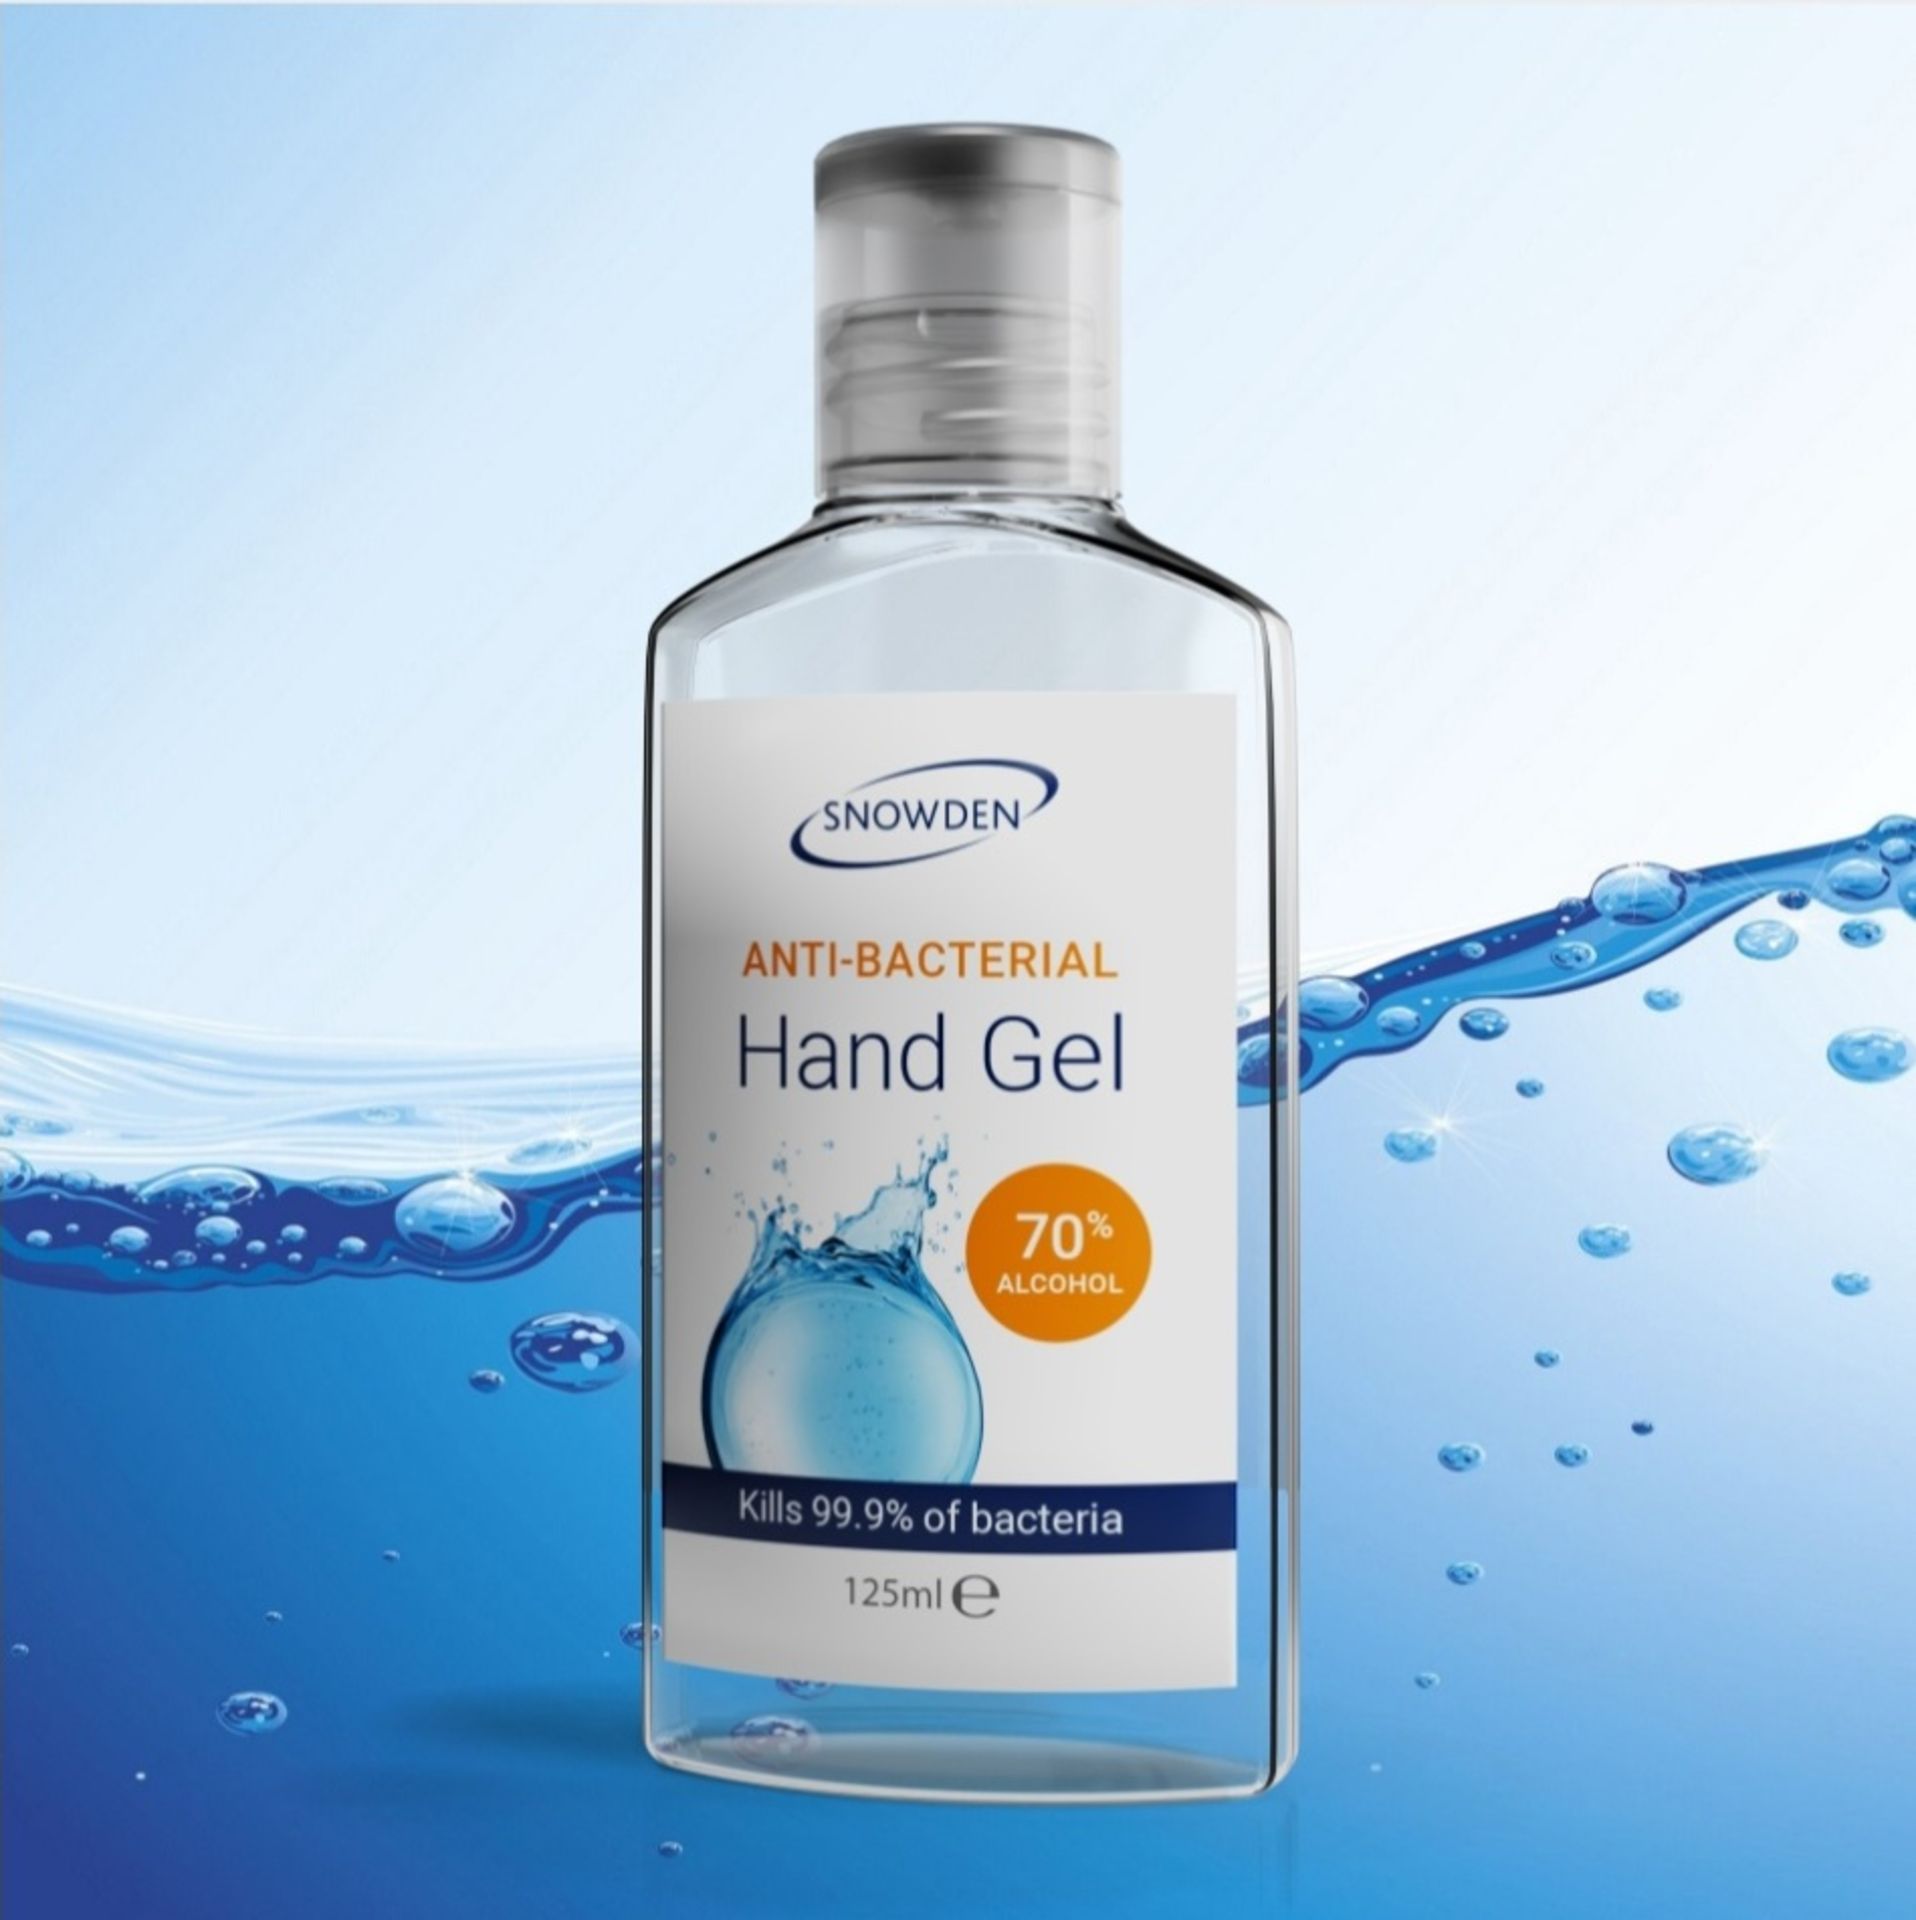 3850 Bottles of UK Made Snowden 125ml Anti-Bacterial Hand Gel (70% alcohol)